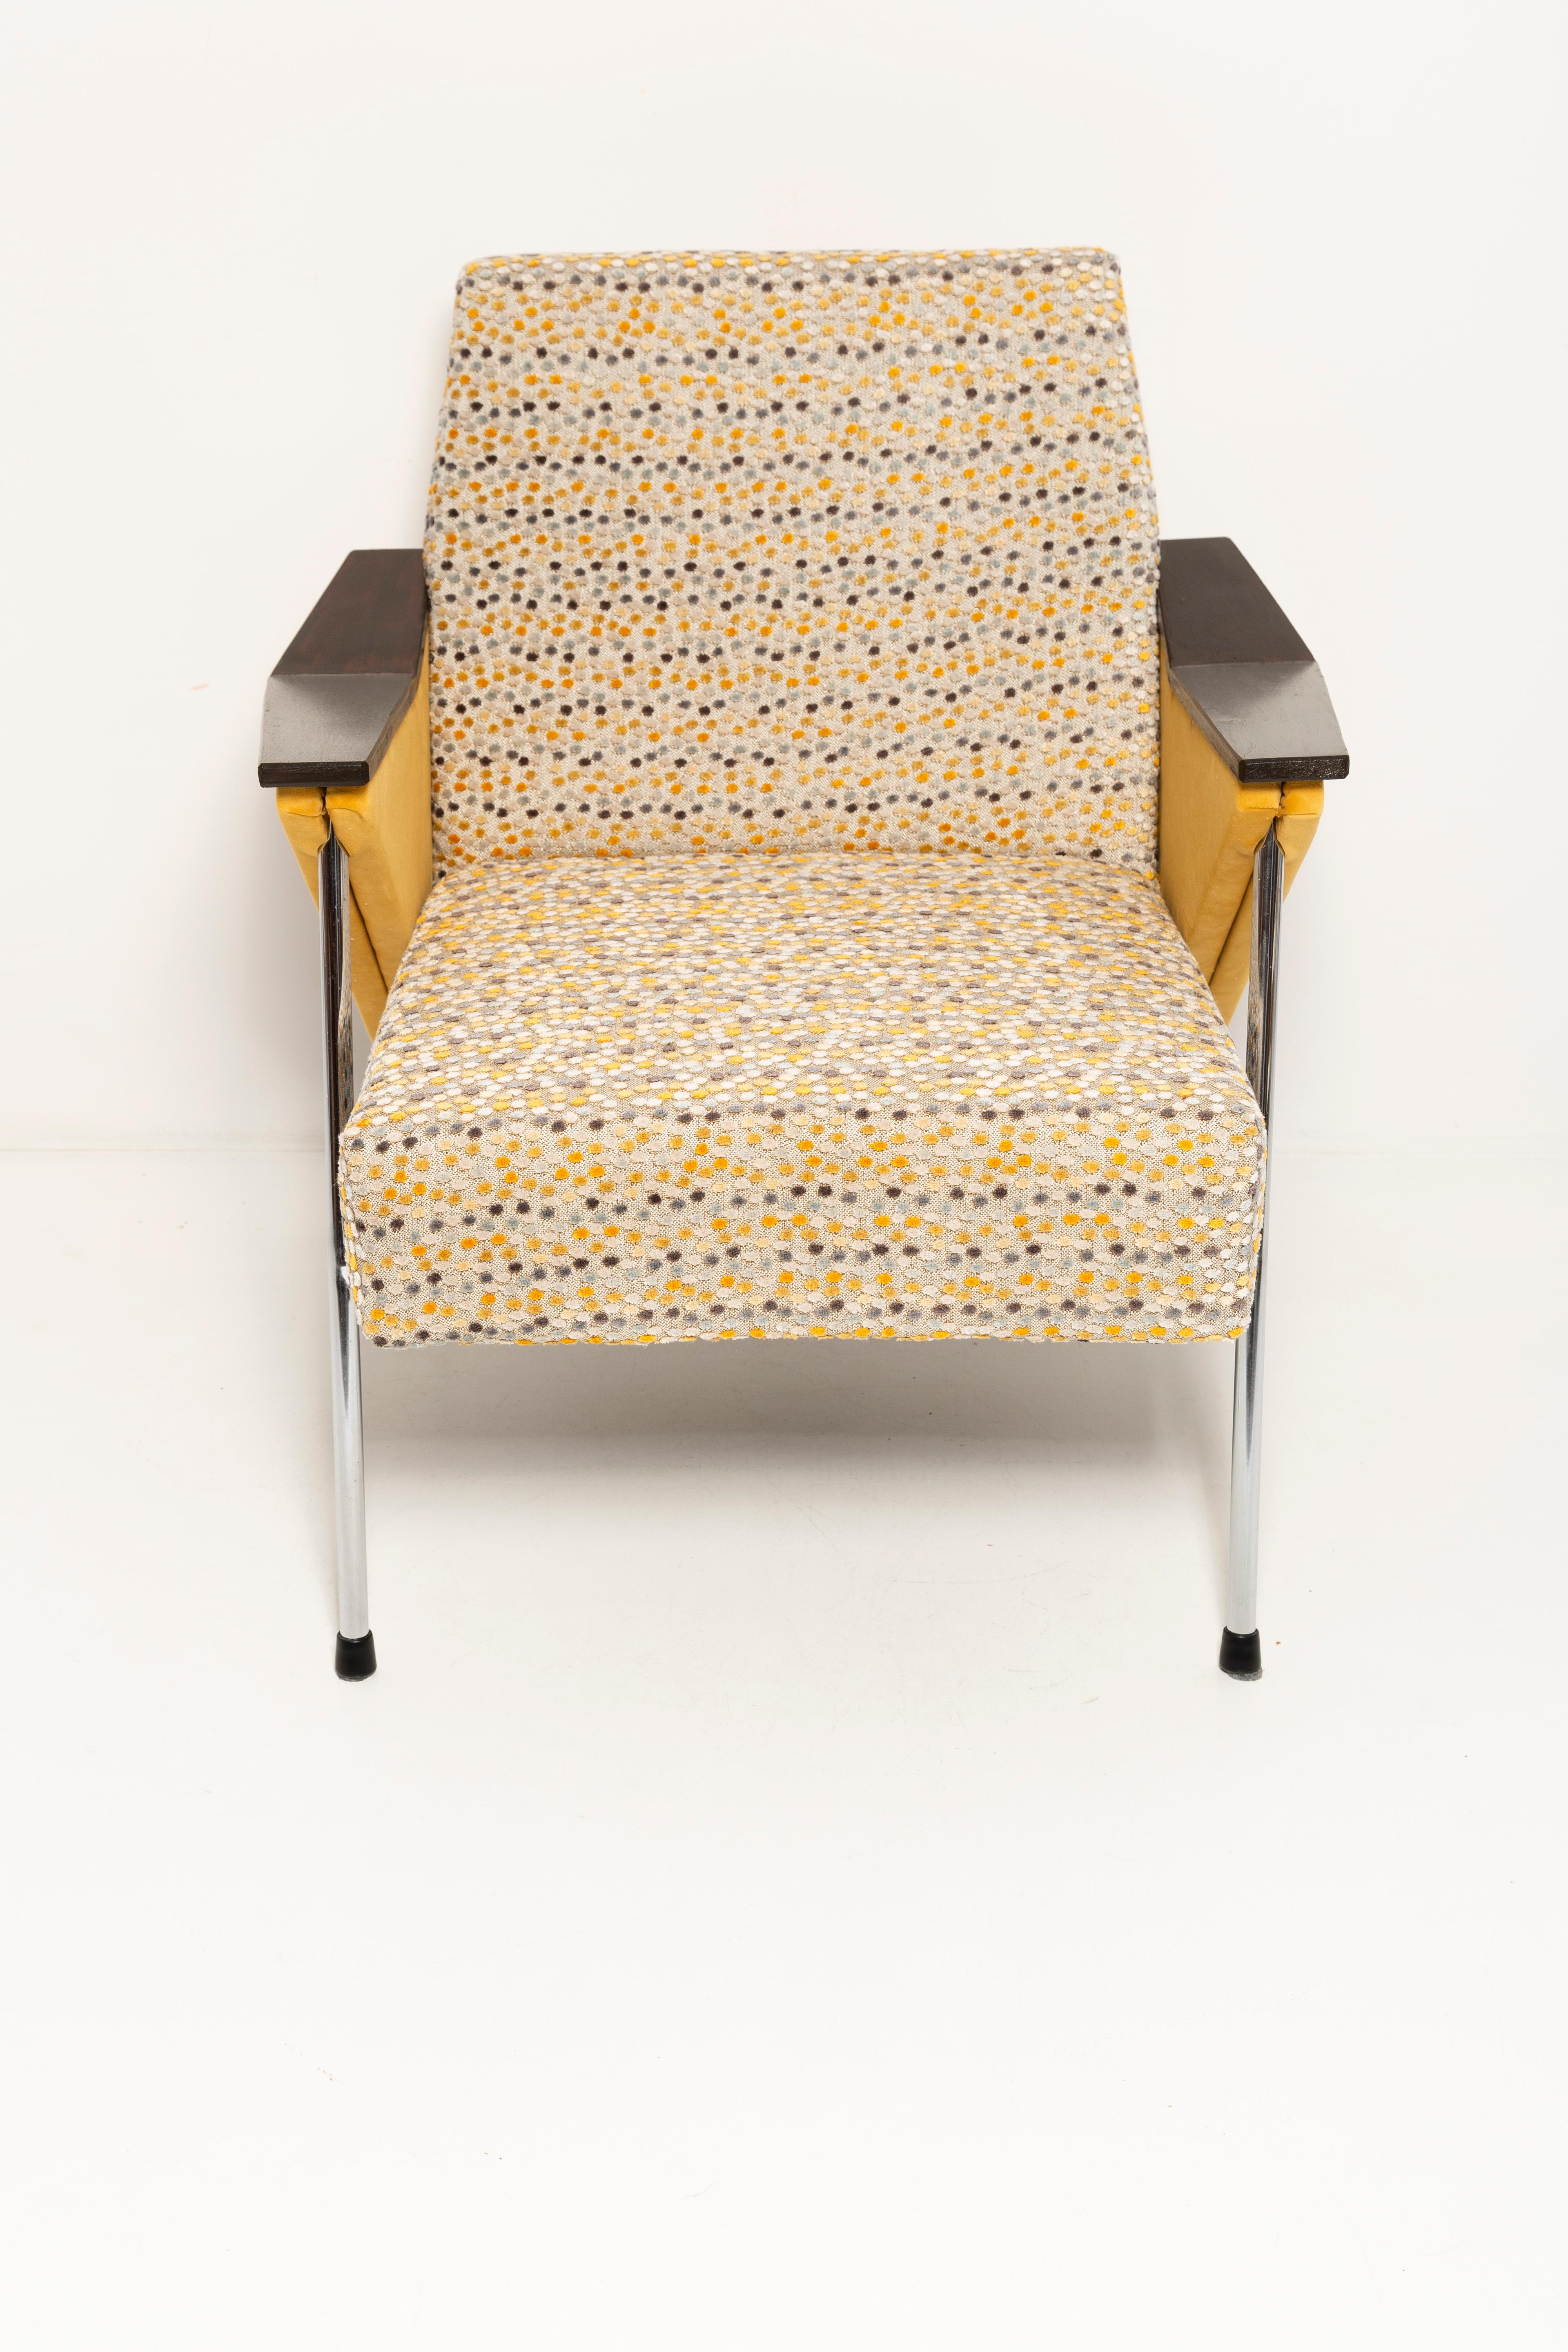 Steel Pair of Mid Century Bat Armchairs, Yellow Dots, Bauhaus Style, Poland, 1970s. For Sale